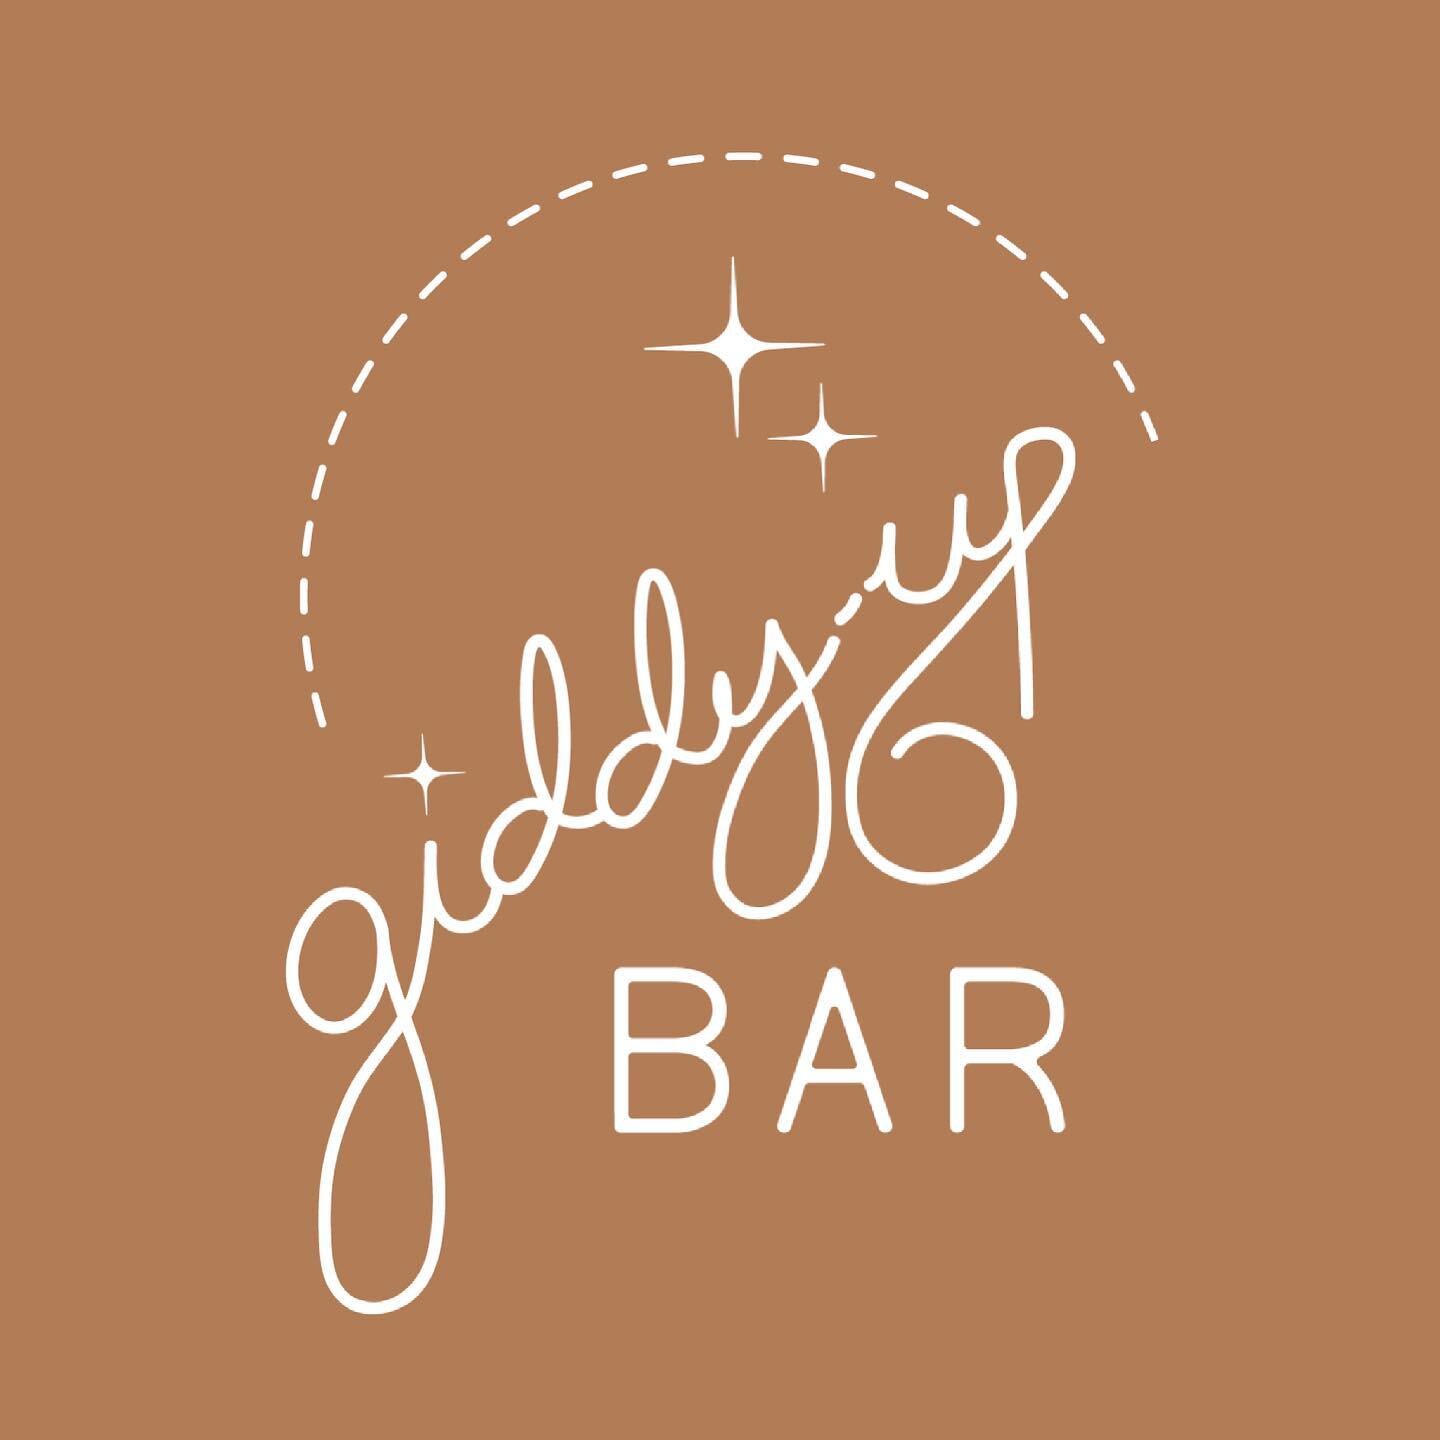 Giddy Up Bar. The concept started as a simple sketch on a napkin&hellip;the brainchild of Matt Sears, of @haskelsearsdesign. The logo identity was then further developed by @kculp_com. The trailer was a complete custom build, ordered specifically and